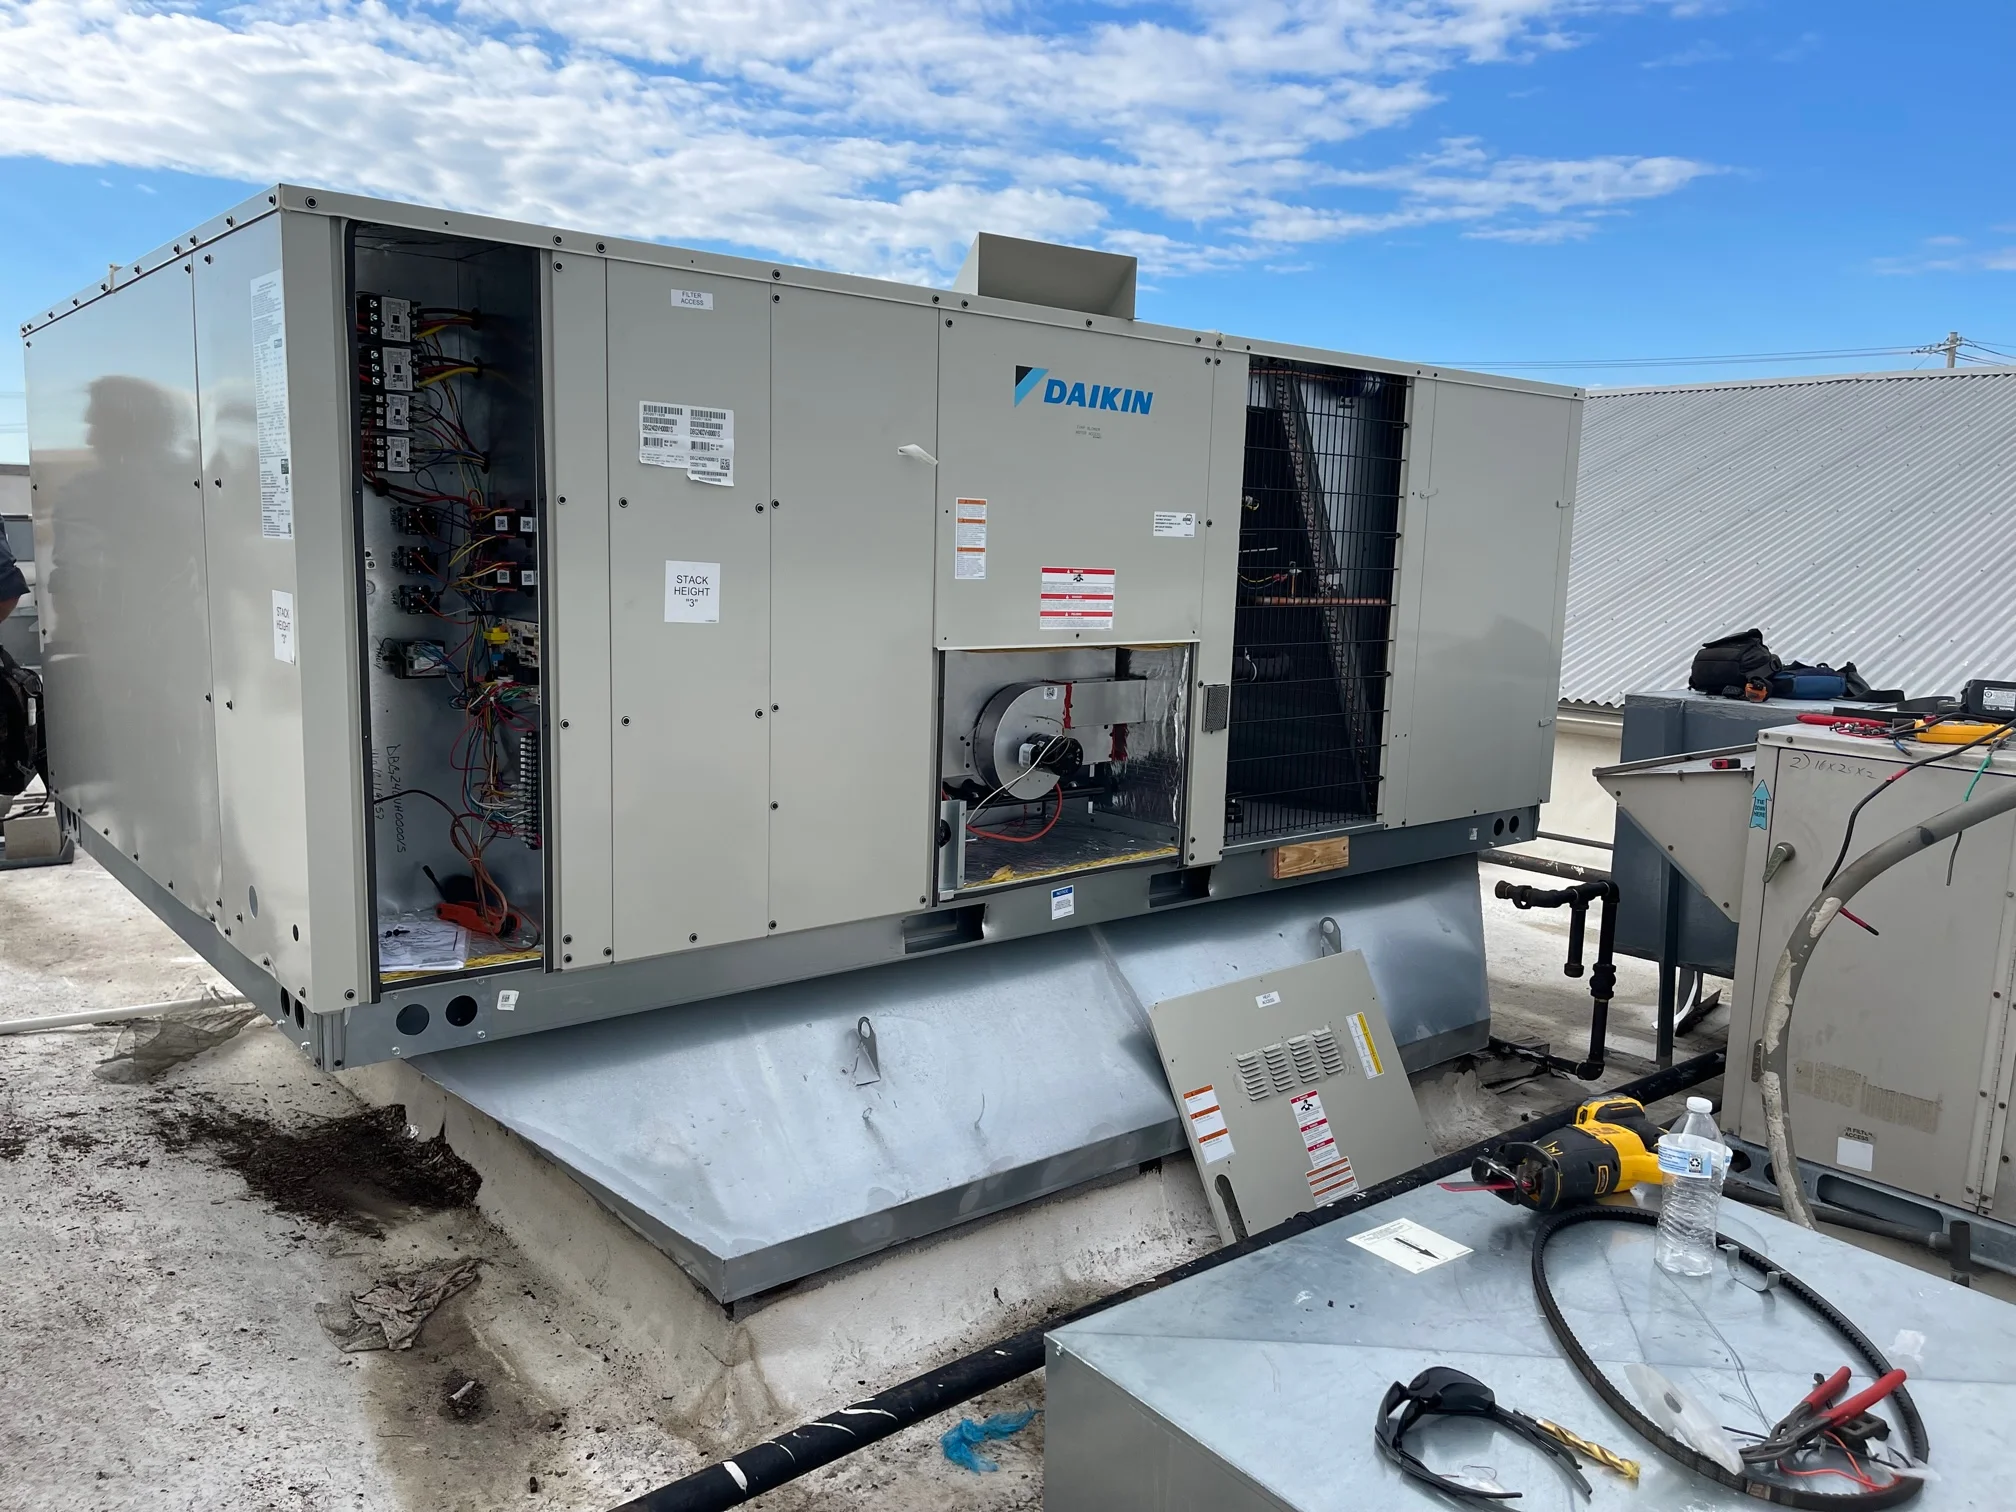 Preparing to connect gas line on this Daikin 20 ton commercial rooftop gas package unit installation in Frisco, Texas